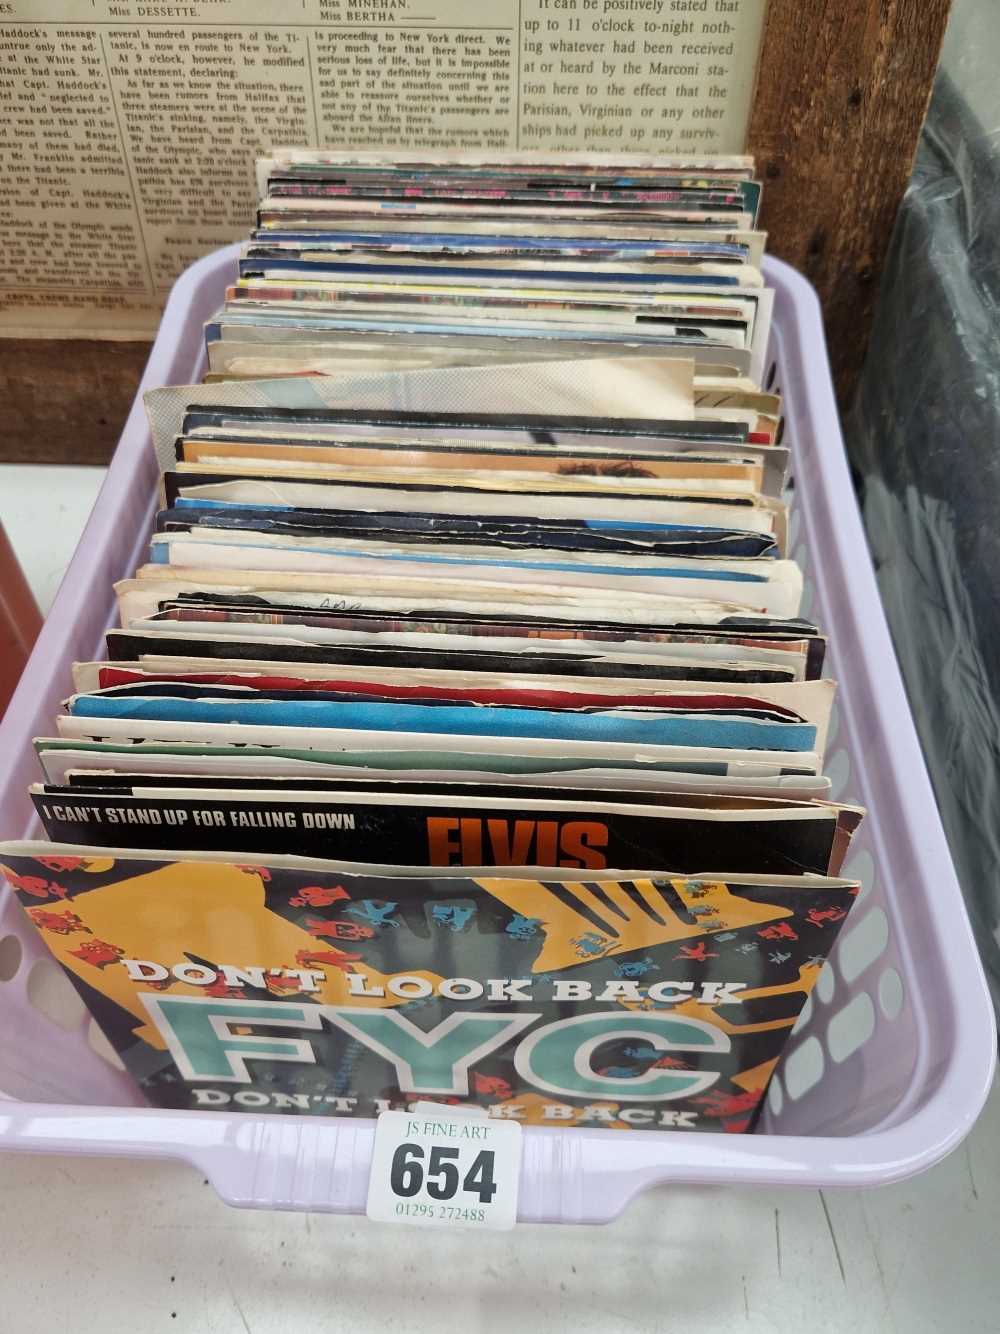 Approximately 100 7" single records mostly 70's and 80's pop and rock.